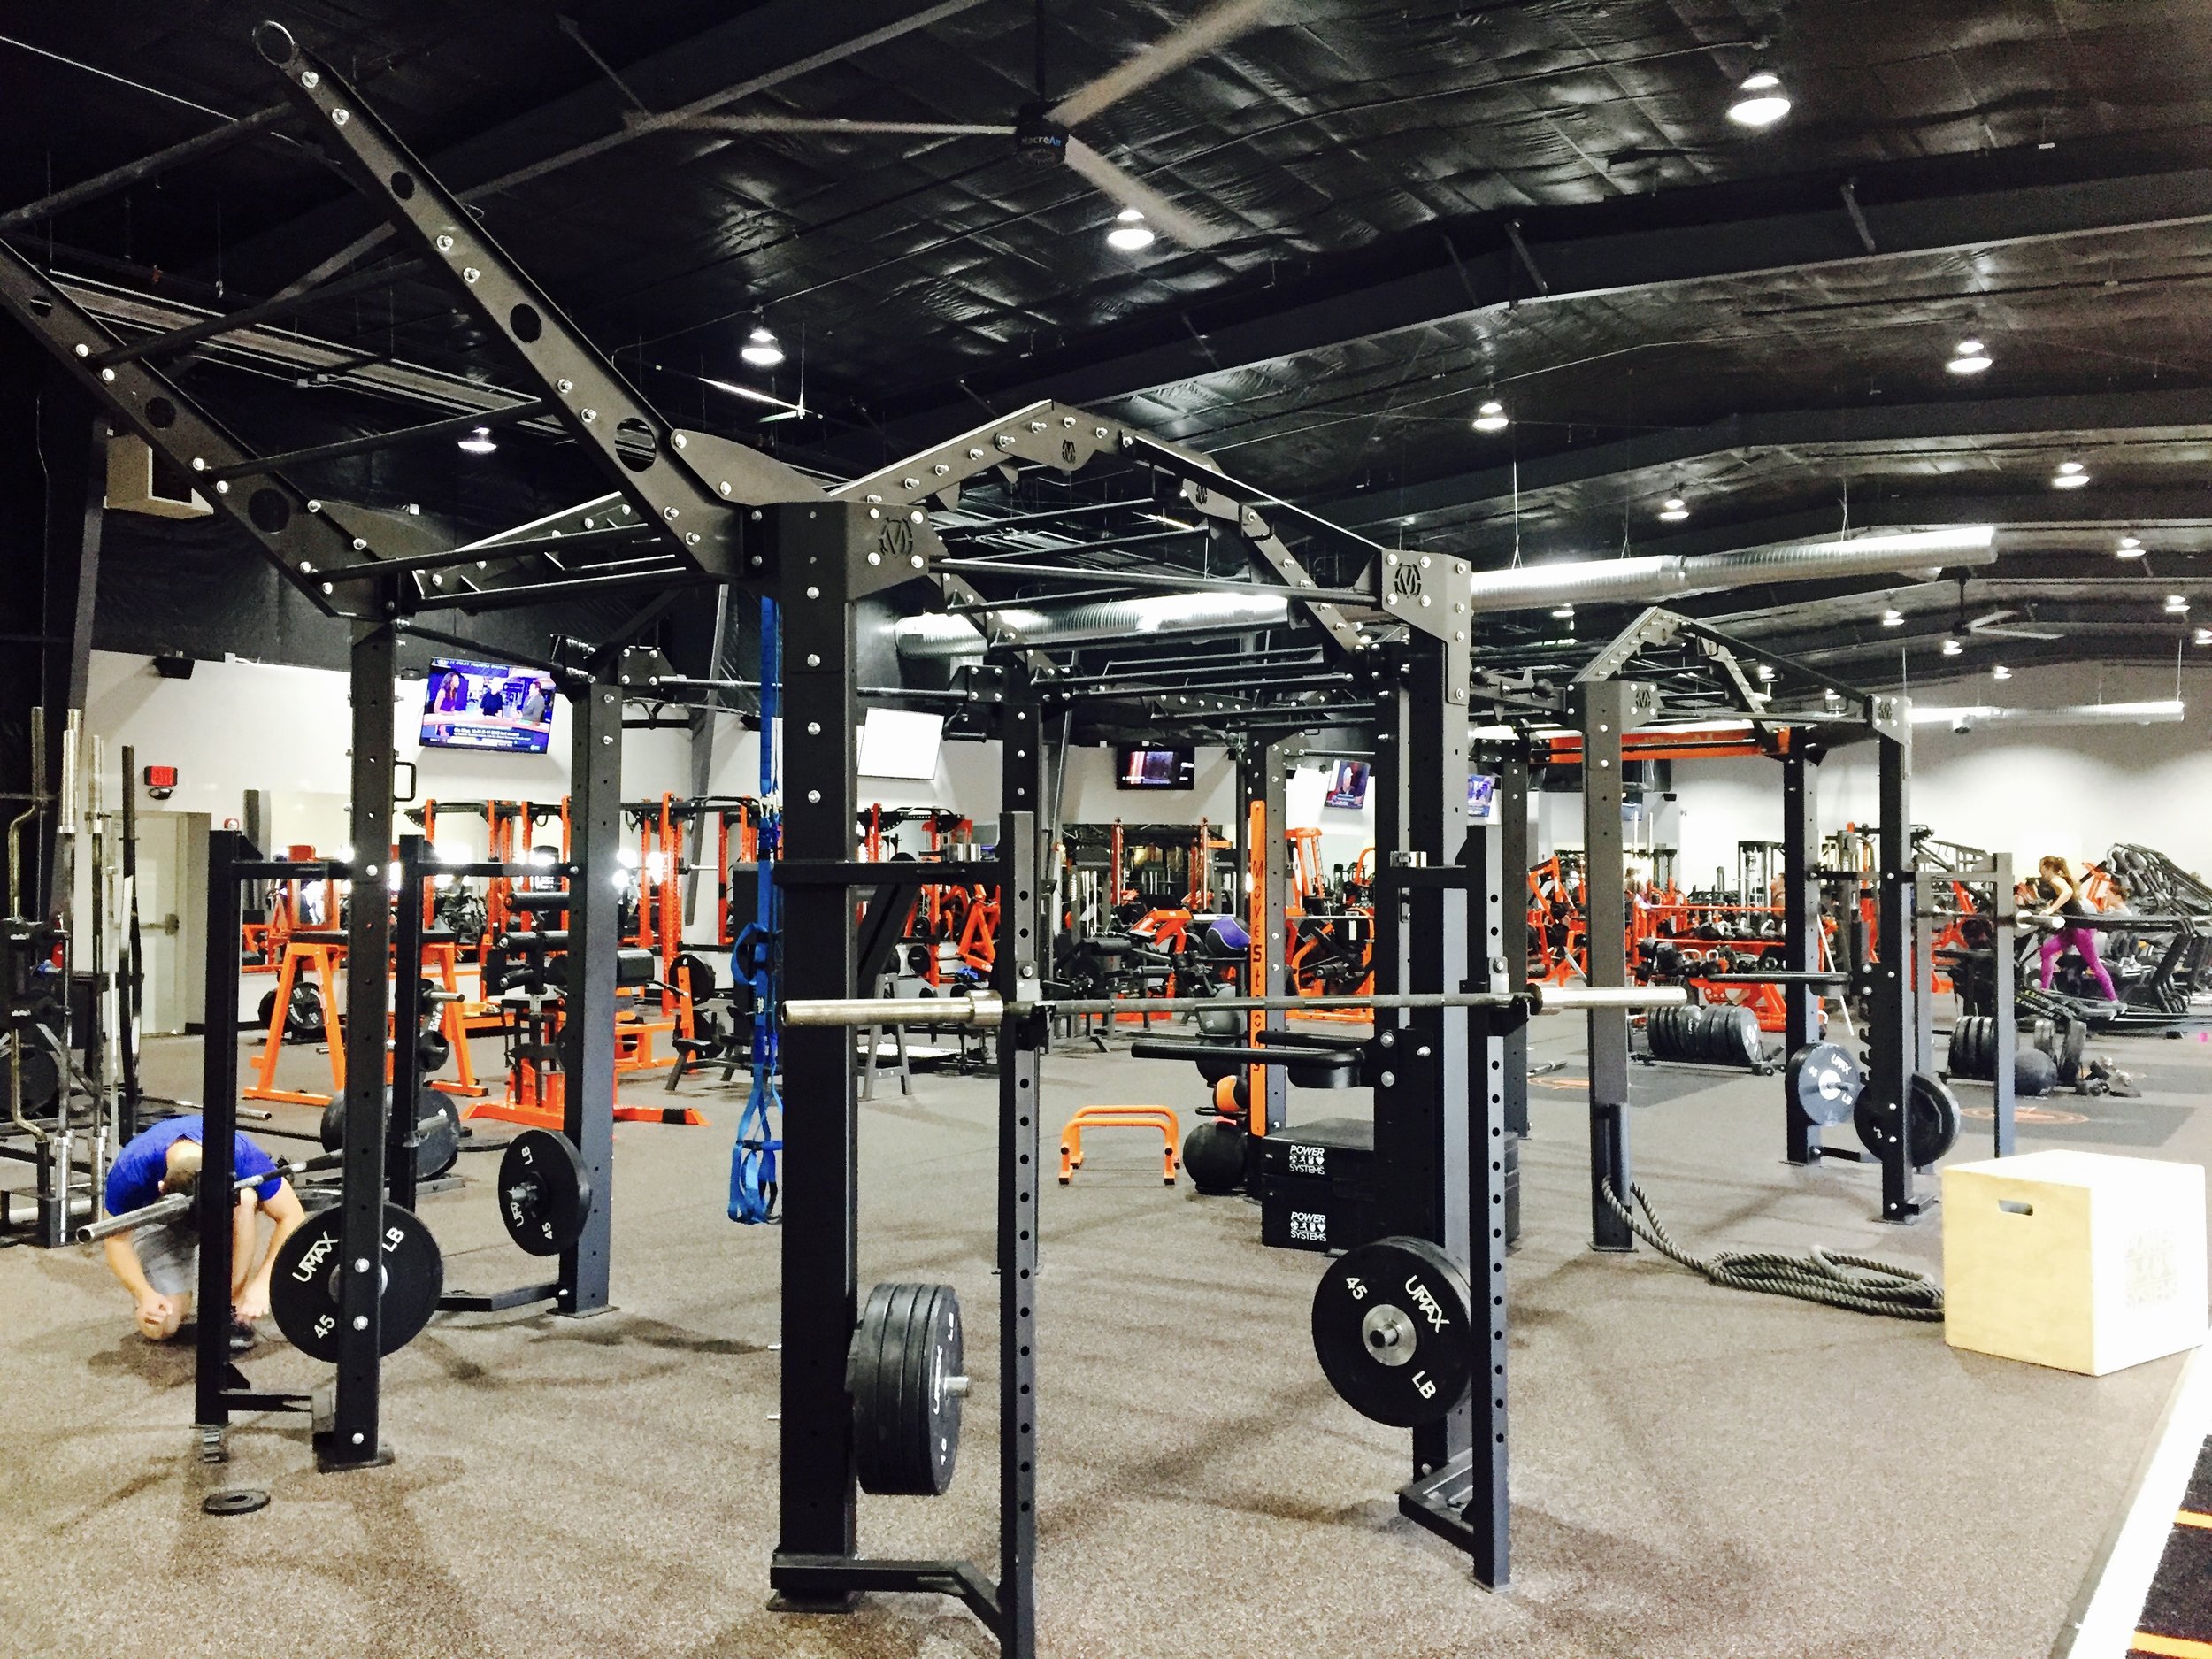 Additional squat stand stations